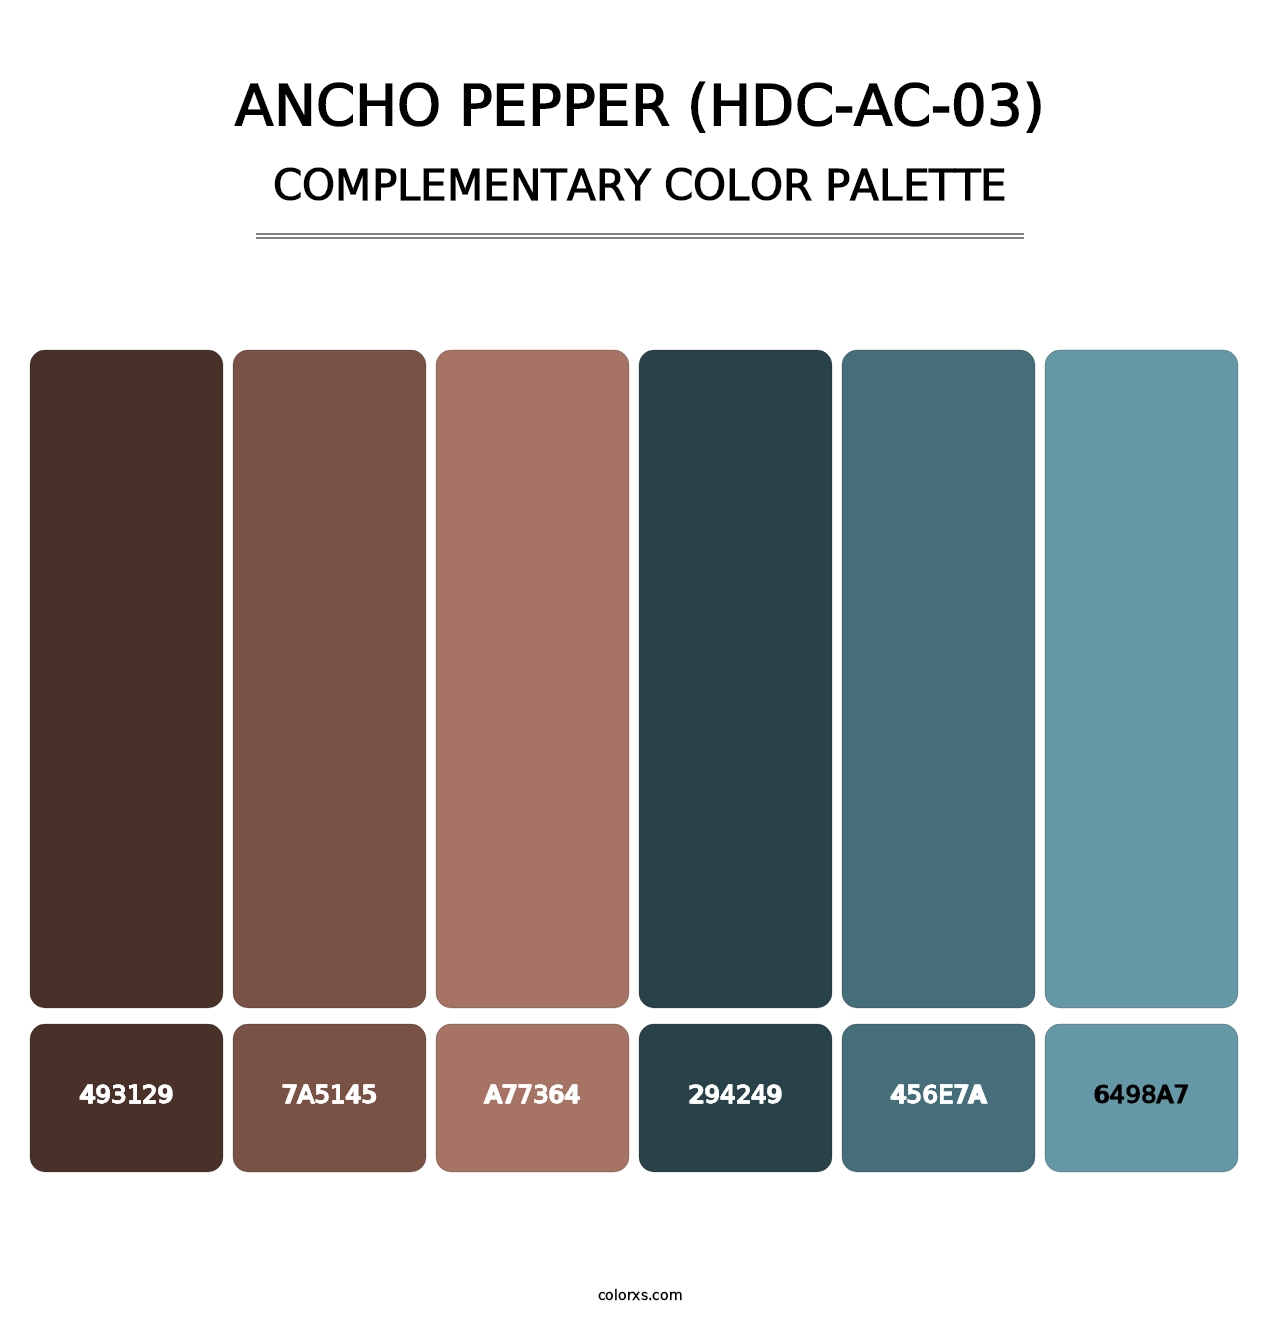 Ancho Pepper (HDC-AC-03) - Complementary Color Palette